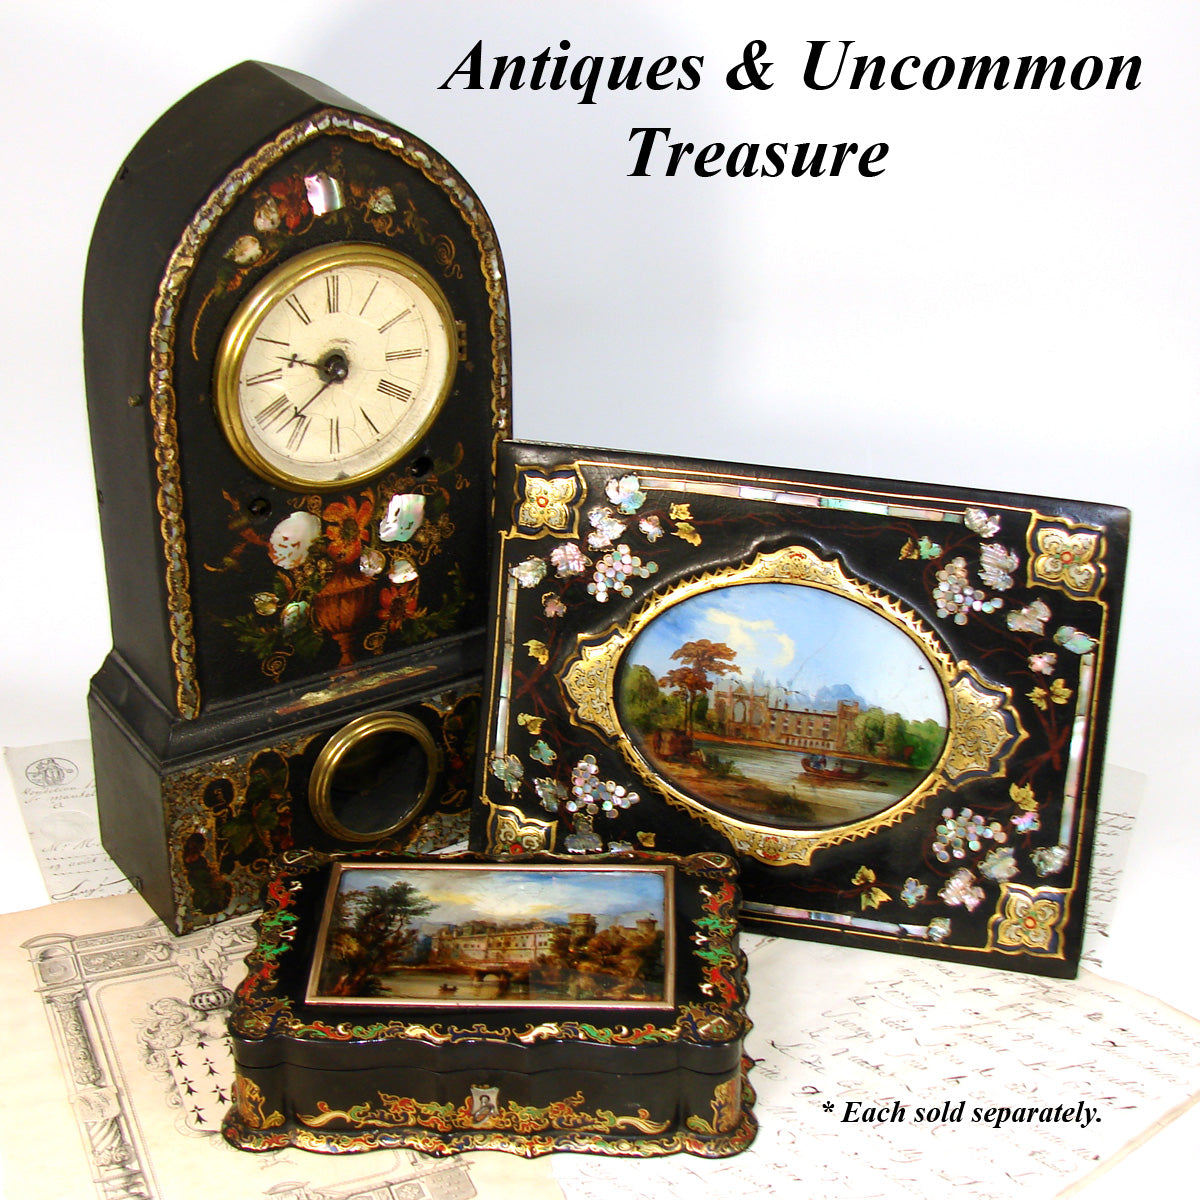 Rare Antique Victorian Era Papier Mache Playing Cards or Gaming Box, Grand Tour Eglomise Painting: Warwick Castle